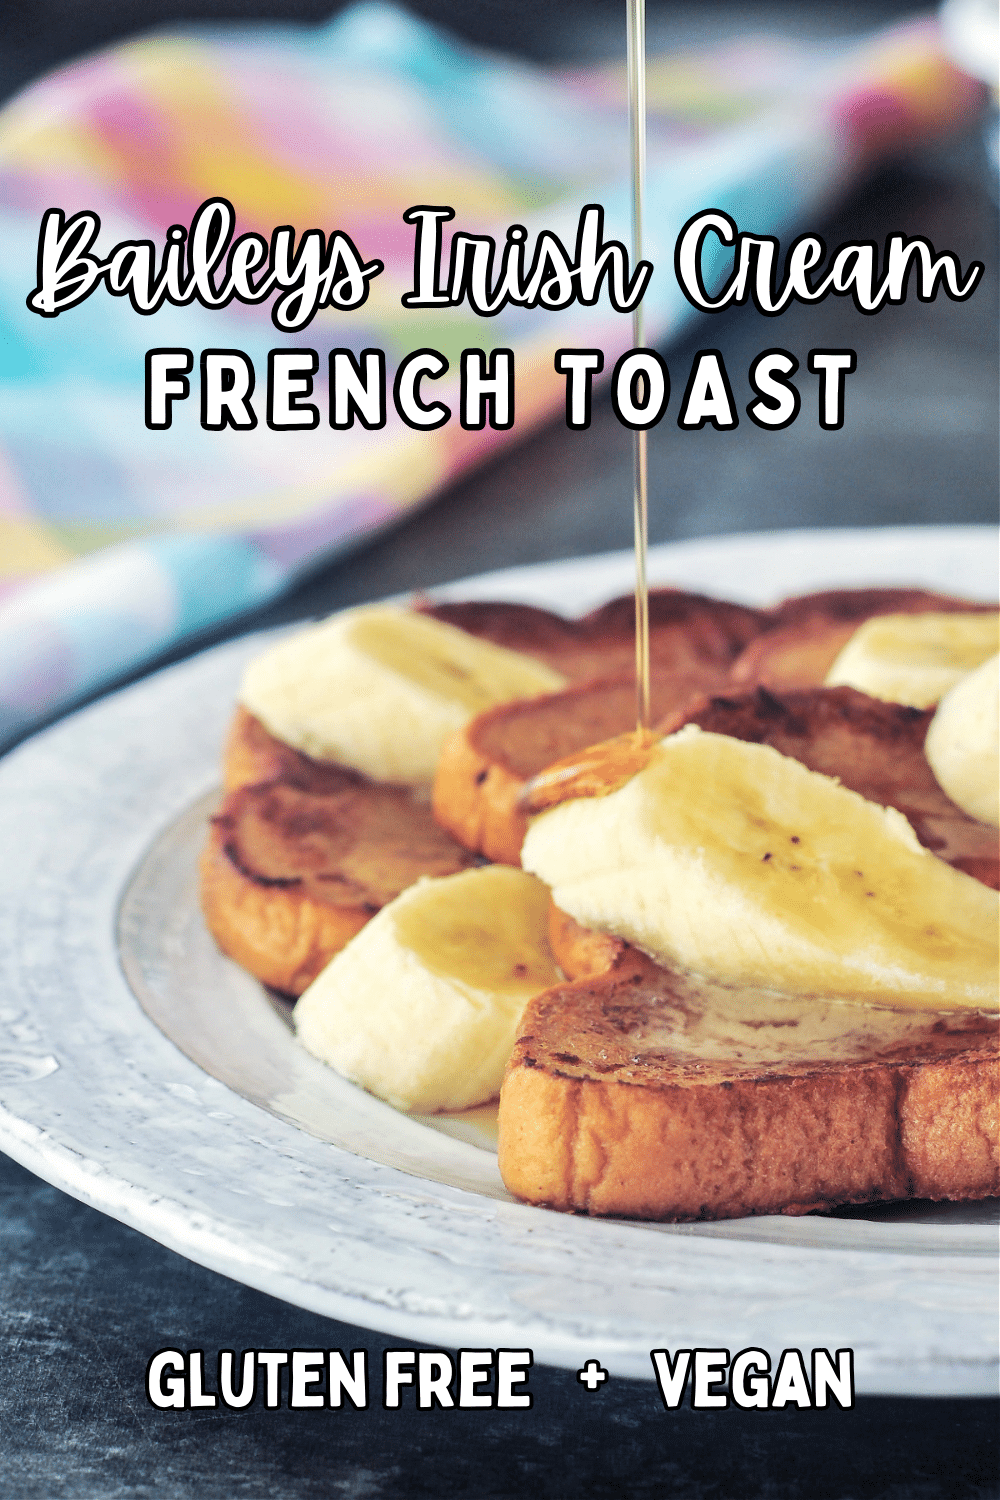 A stack of three slices of Baileys Irish cream French toast on a rustic white plate. French toast is garnished with sliced banana and maple syrup is being poured over the top.